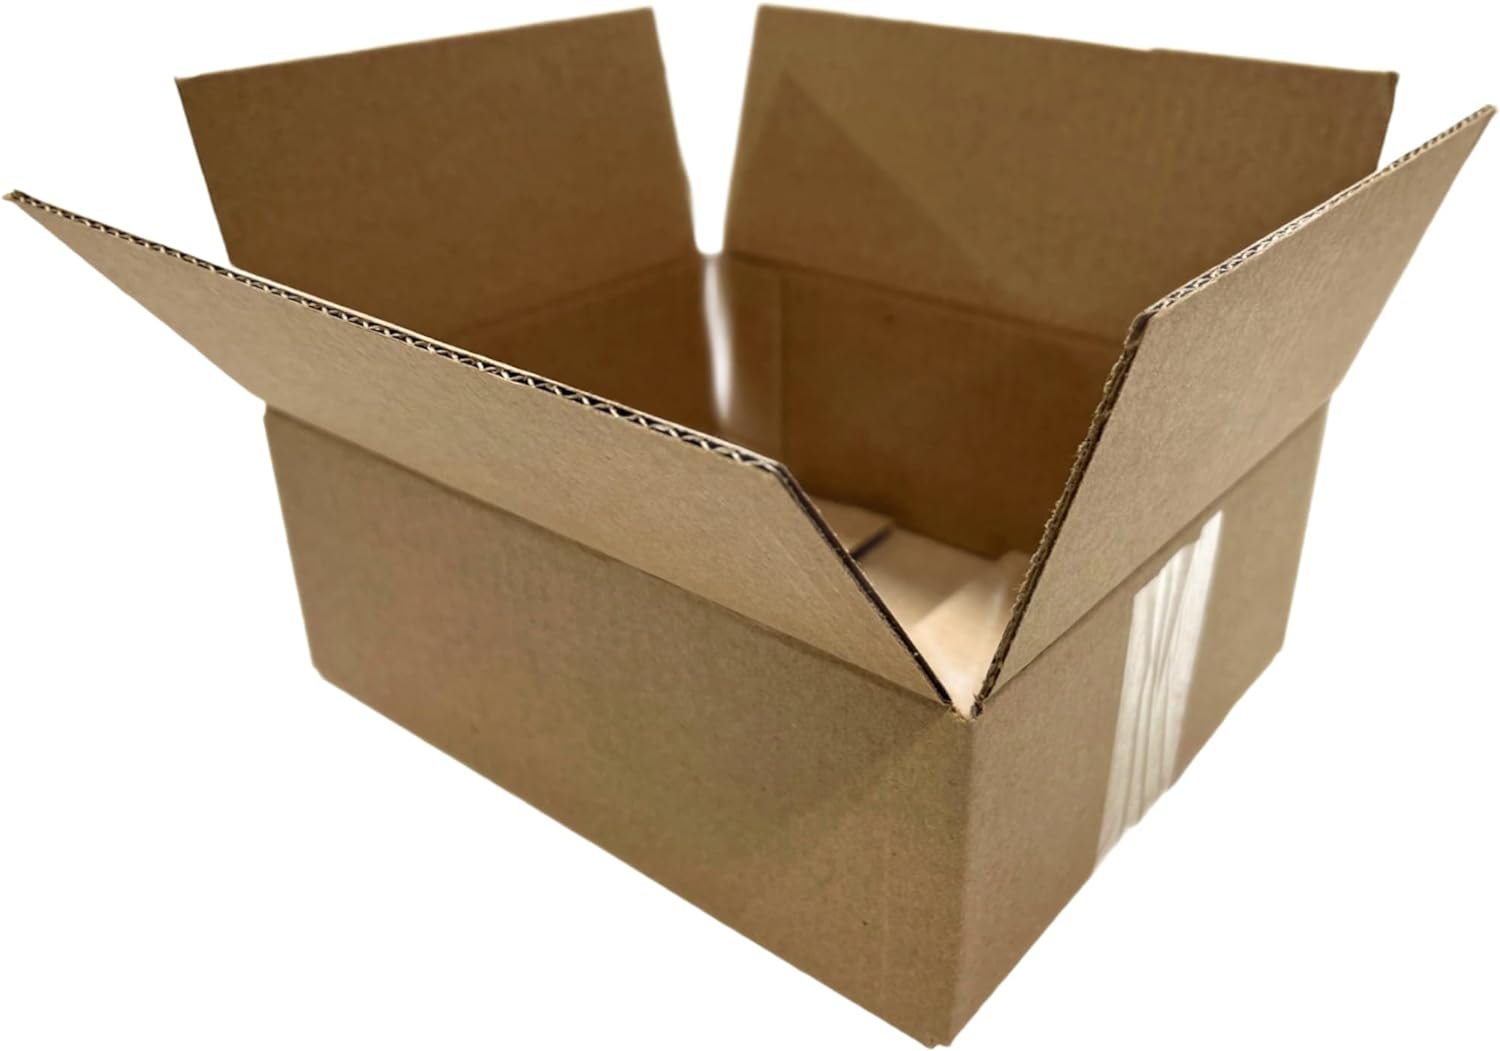 300 6x4x4 Cardboard Paper Boxes Mailing Packing Shipping Box Corrugated Carton